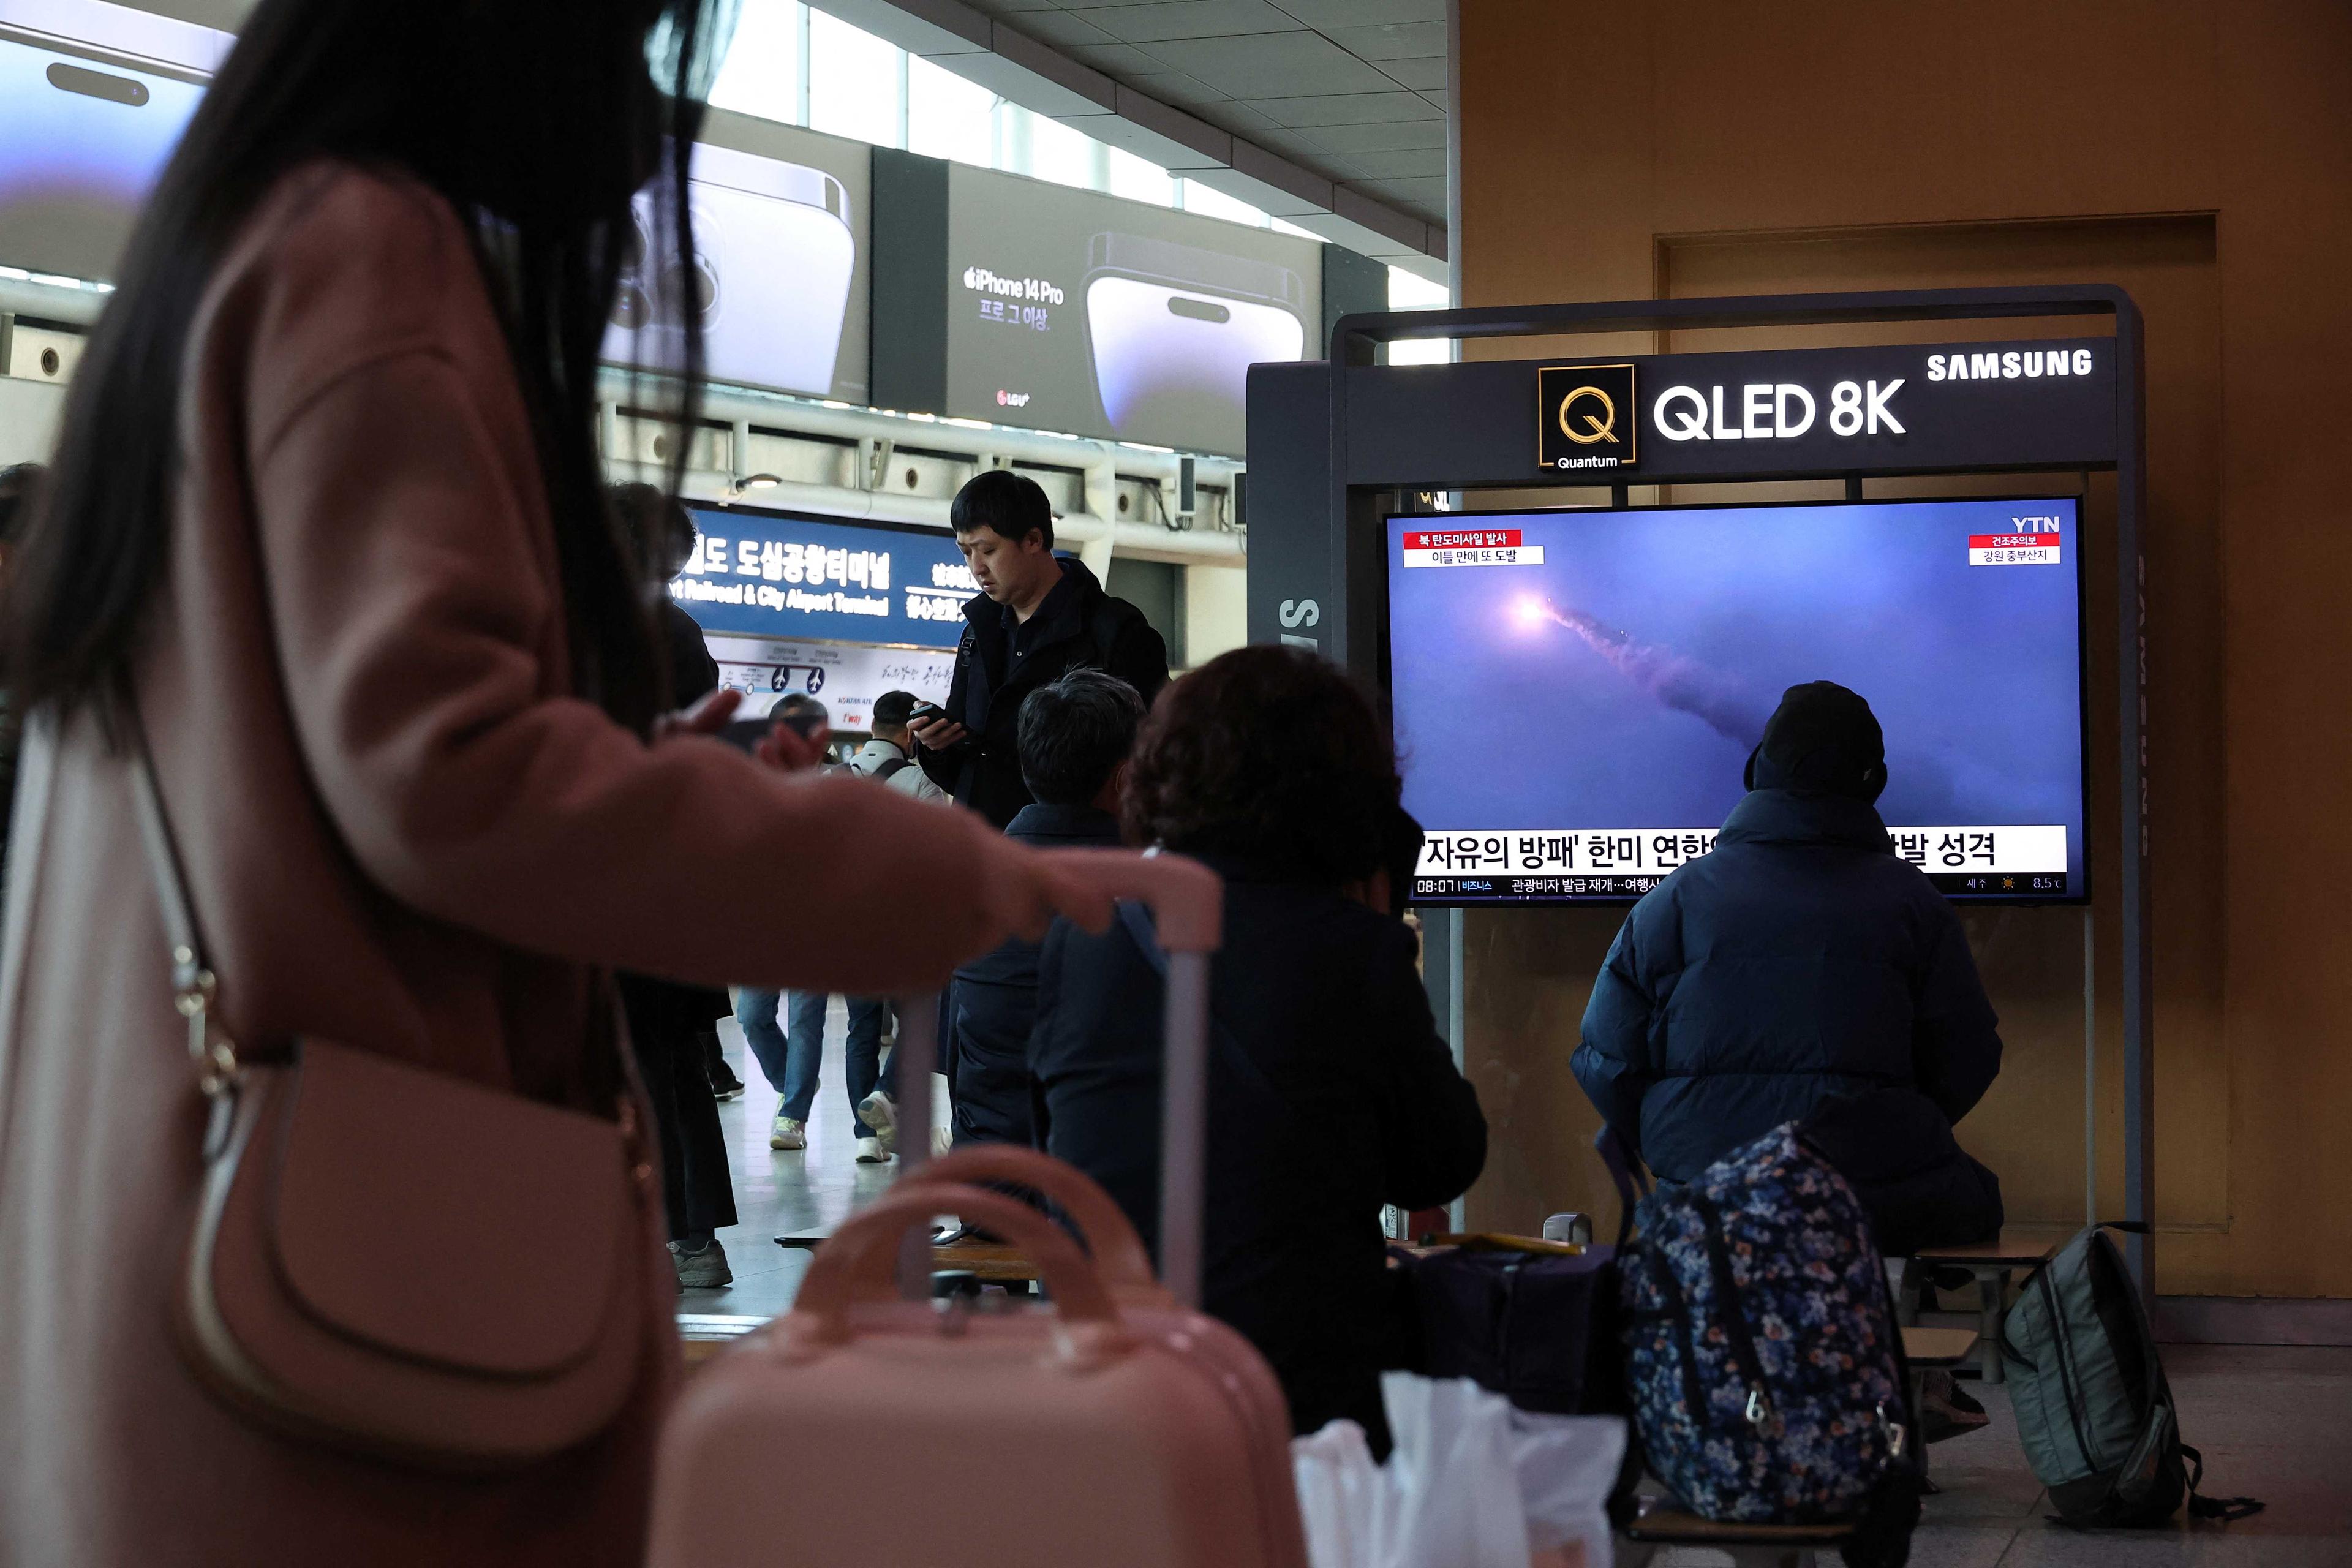 People watch a TV broadcasting a news report on North Korea firing a ballistic missile into the sea off its east coast, at a railway station in Seoul, South Korea, March 16. Photo: Reuters